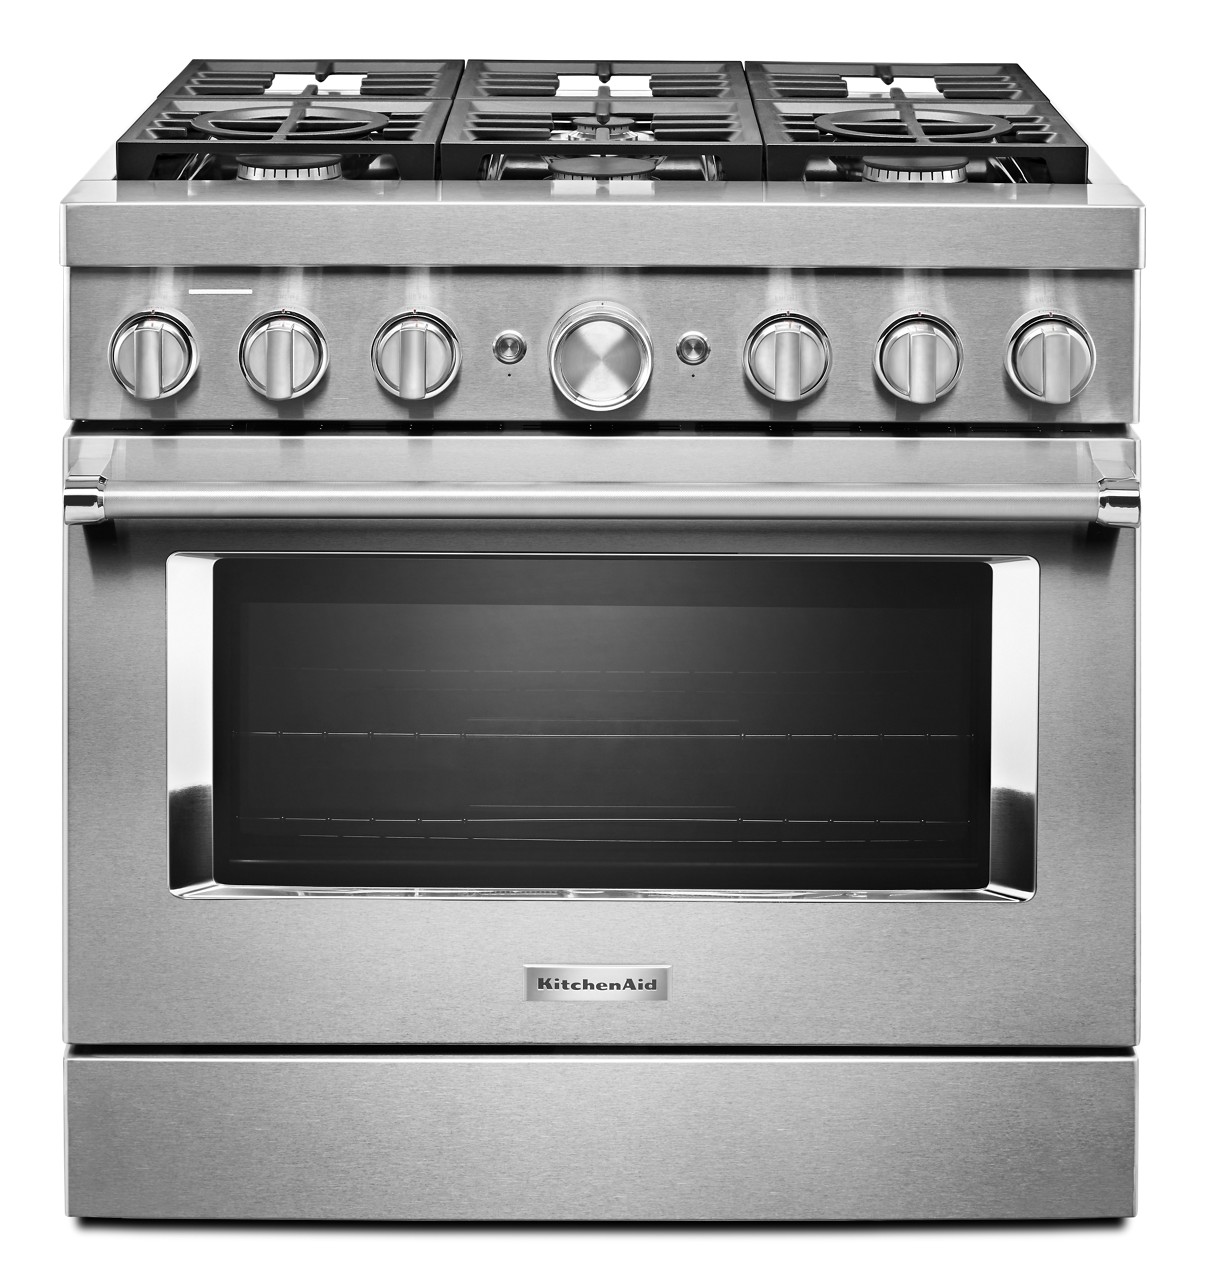 KitchenAid® 36" Stainless Steel Commercial Style Freestanding Dual Fuel Range-KFDC506JSS